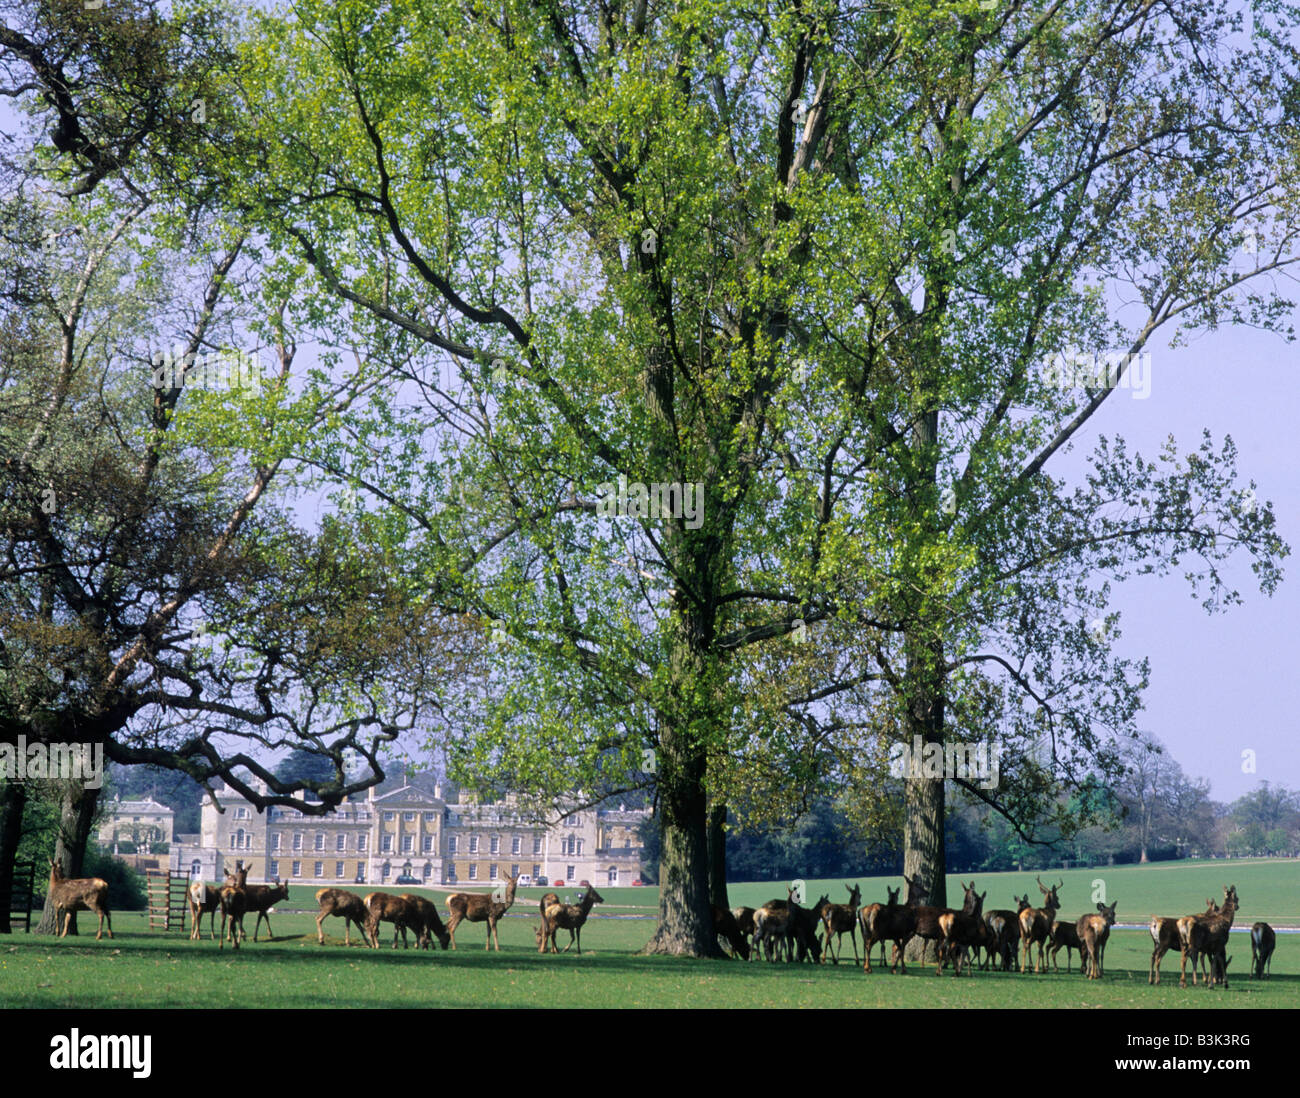 Woburn Park Abbey and Herd of Deer Bedfordshire English stately home parkland England UK Stock Photo